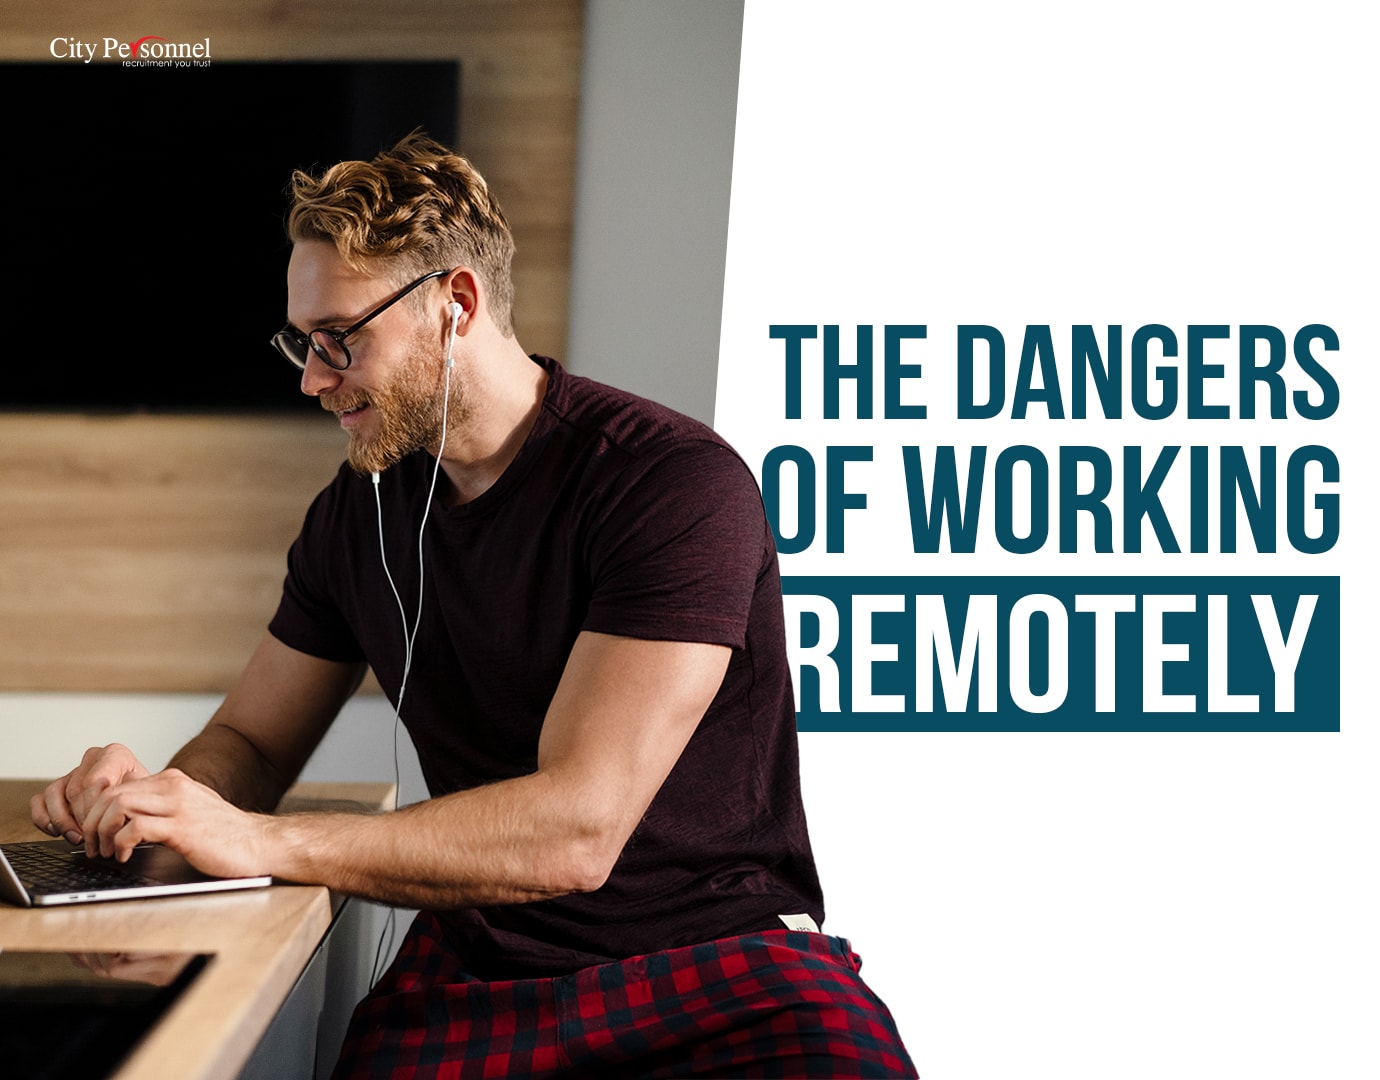 The dangers of working remotely